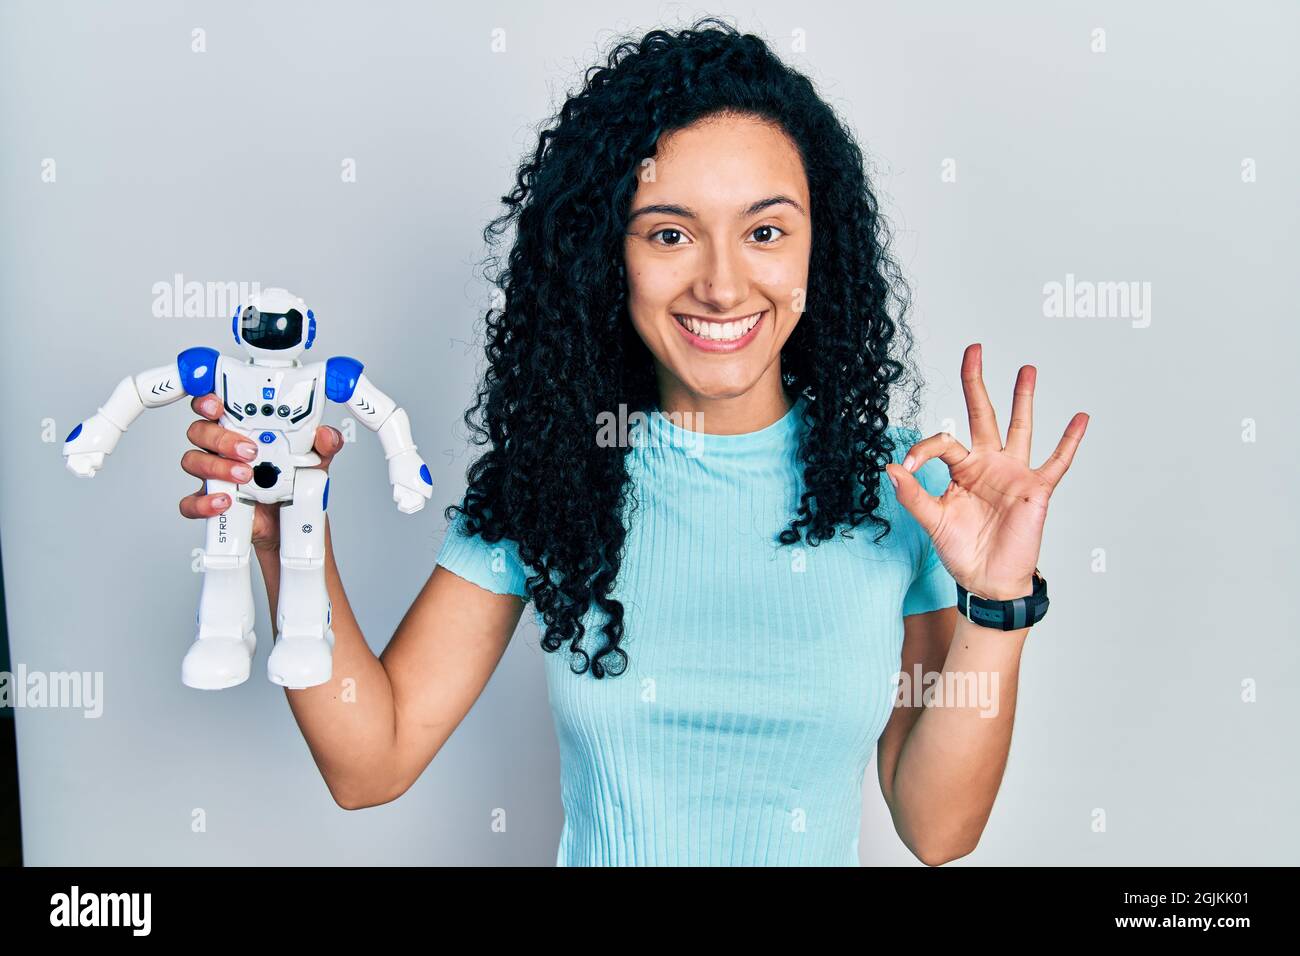 Young hispanic woman with curly hair holding robot toy doing ok sign with  fingers, smiling friendly gesturing excellent symbol Stock Photo - Alamy